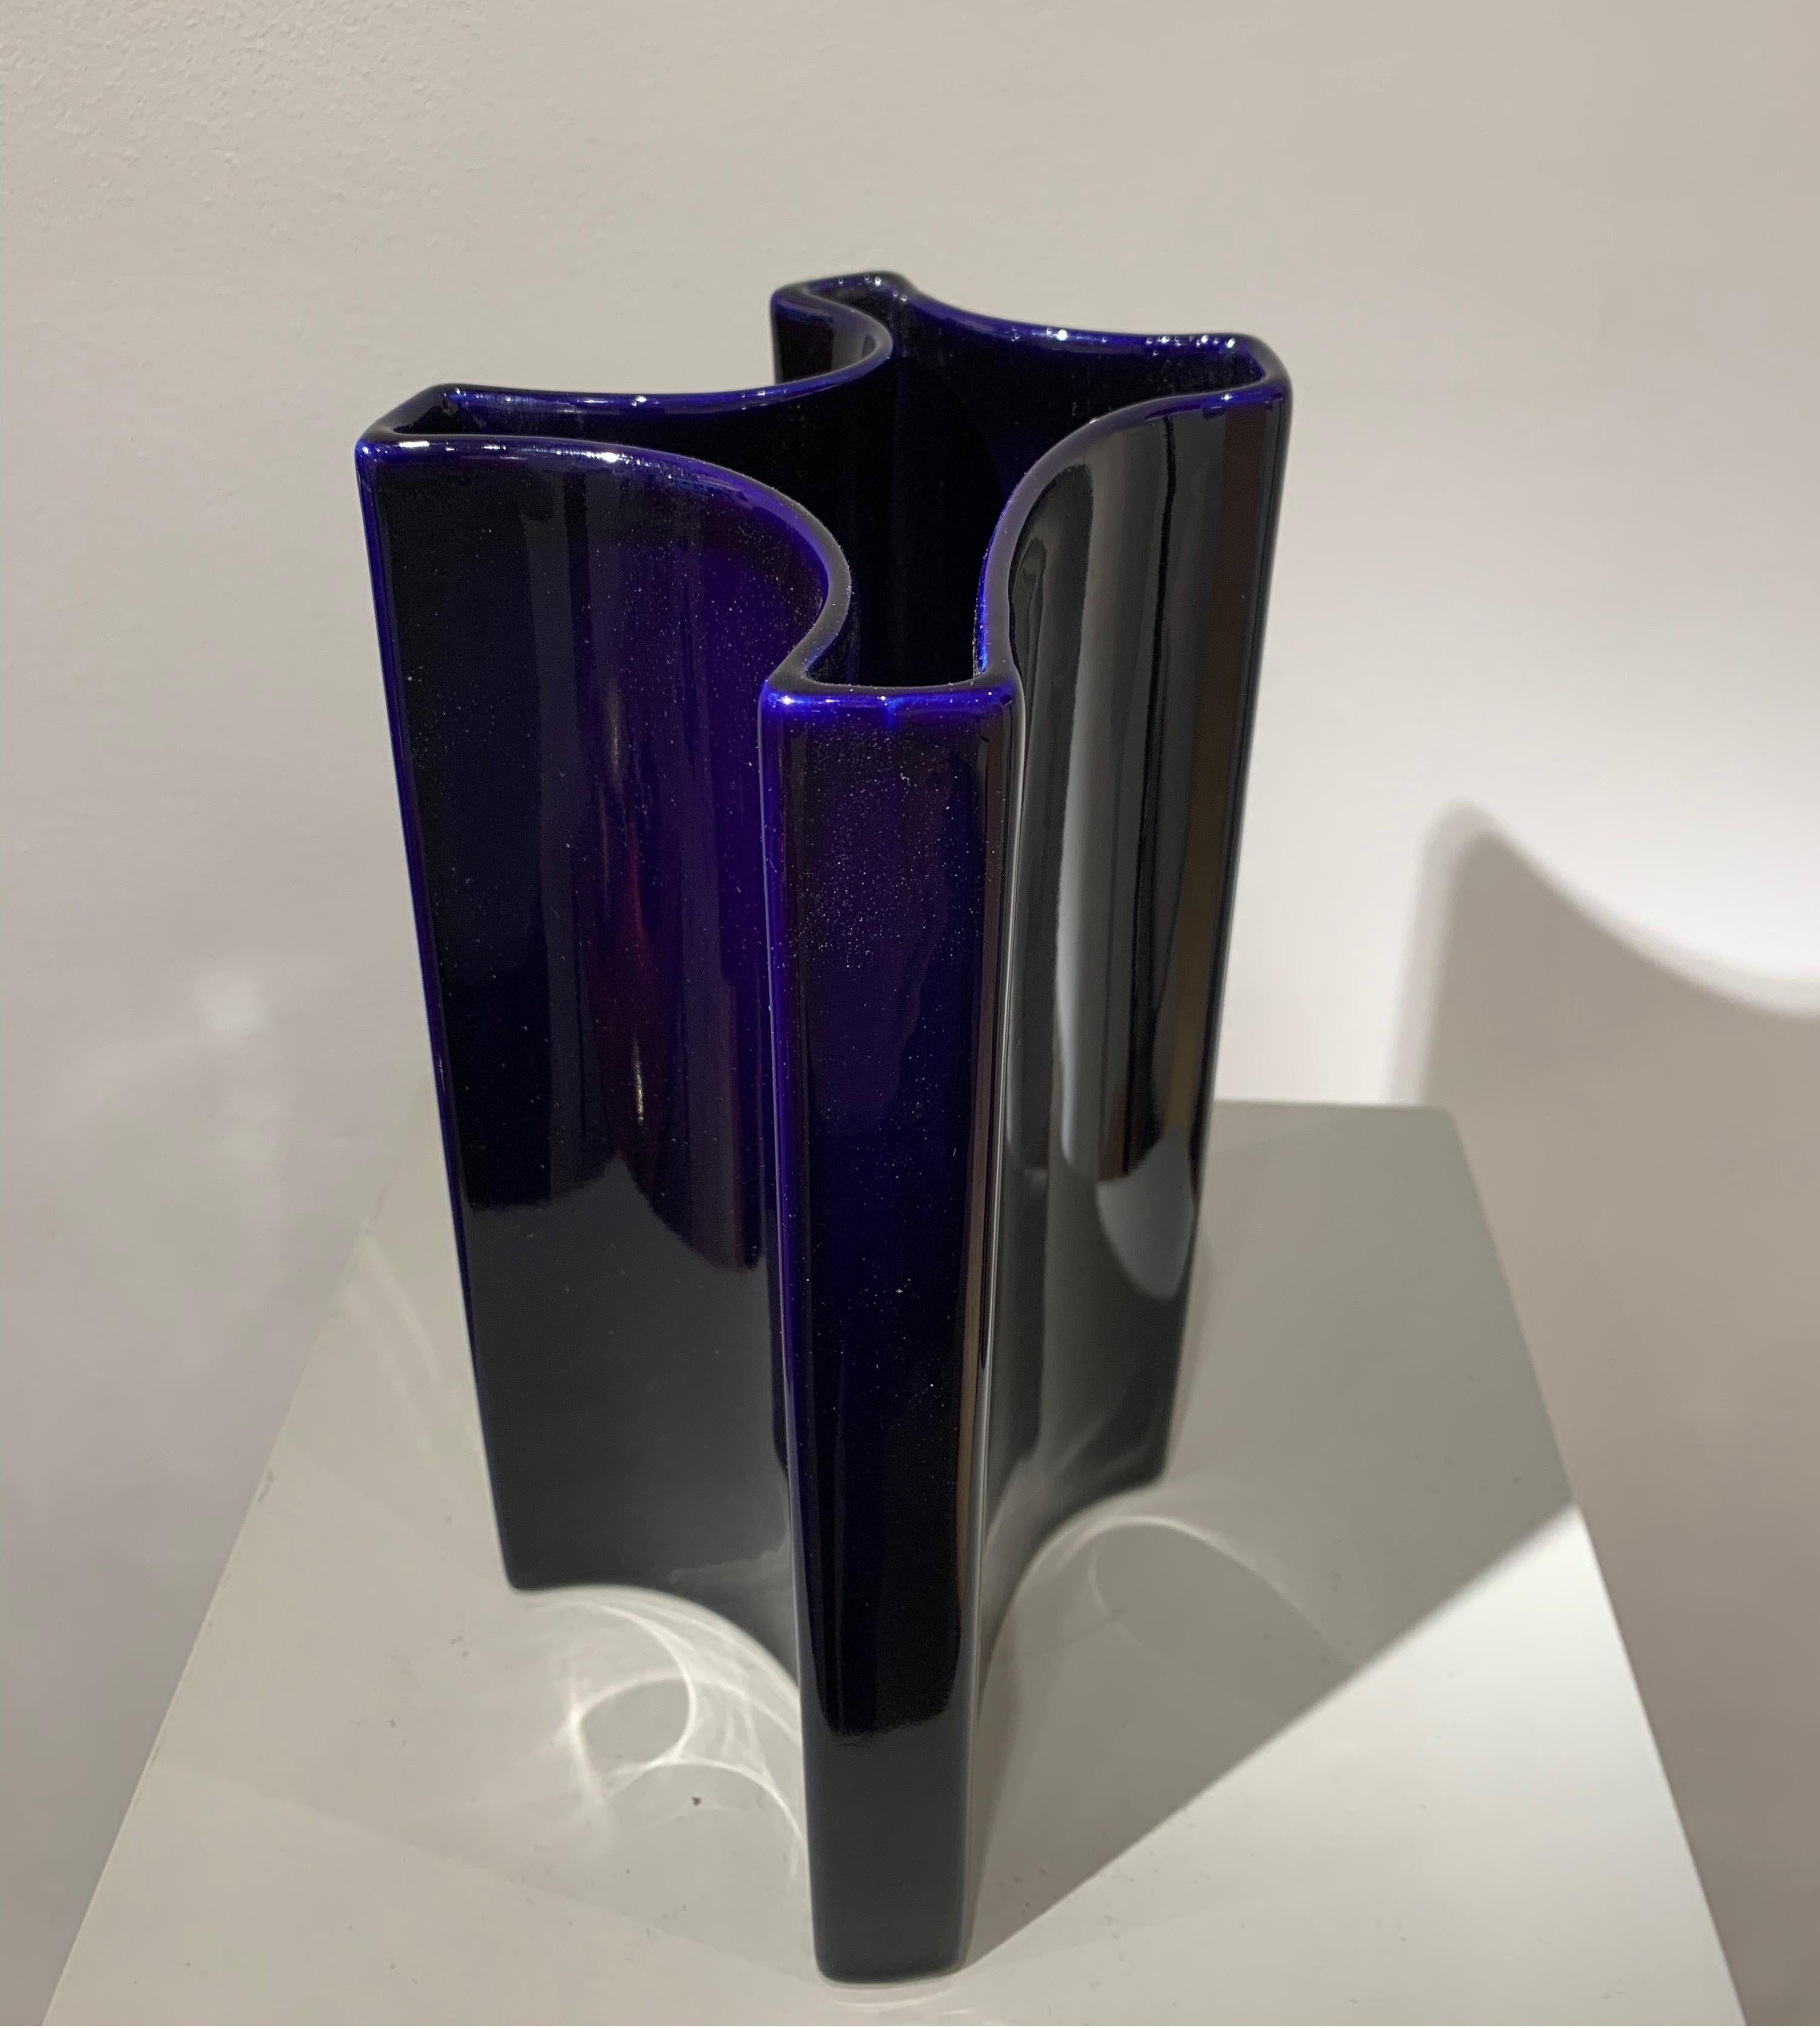 Fratelli Brambilla is the manufacture which produced the vase designed by Angelo Mangiarotti in the 1960s. The shape is irregular, free. See mark and old sticker.